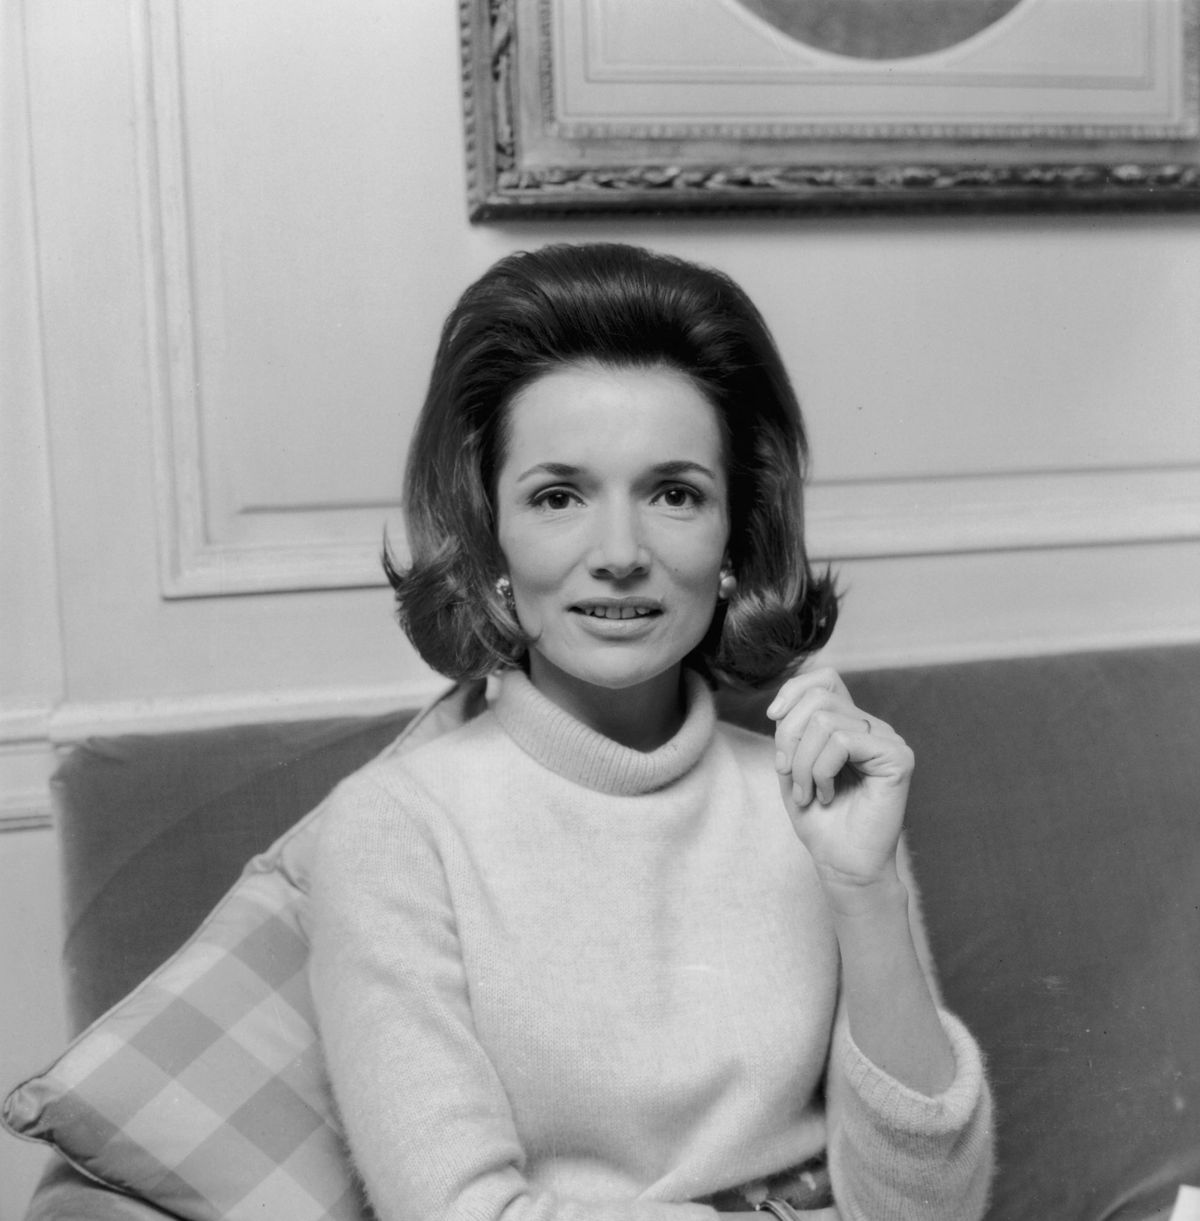 The Best of Lee Radziwill's Collection Being Auctioned Off at Christie's